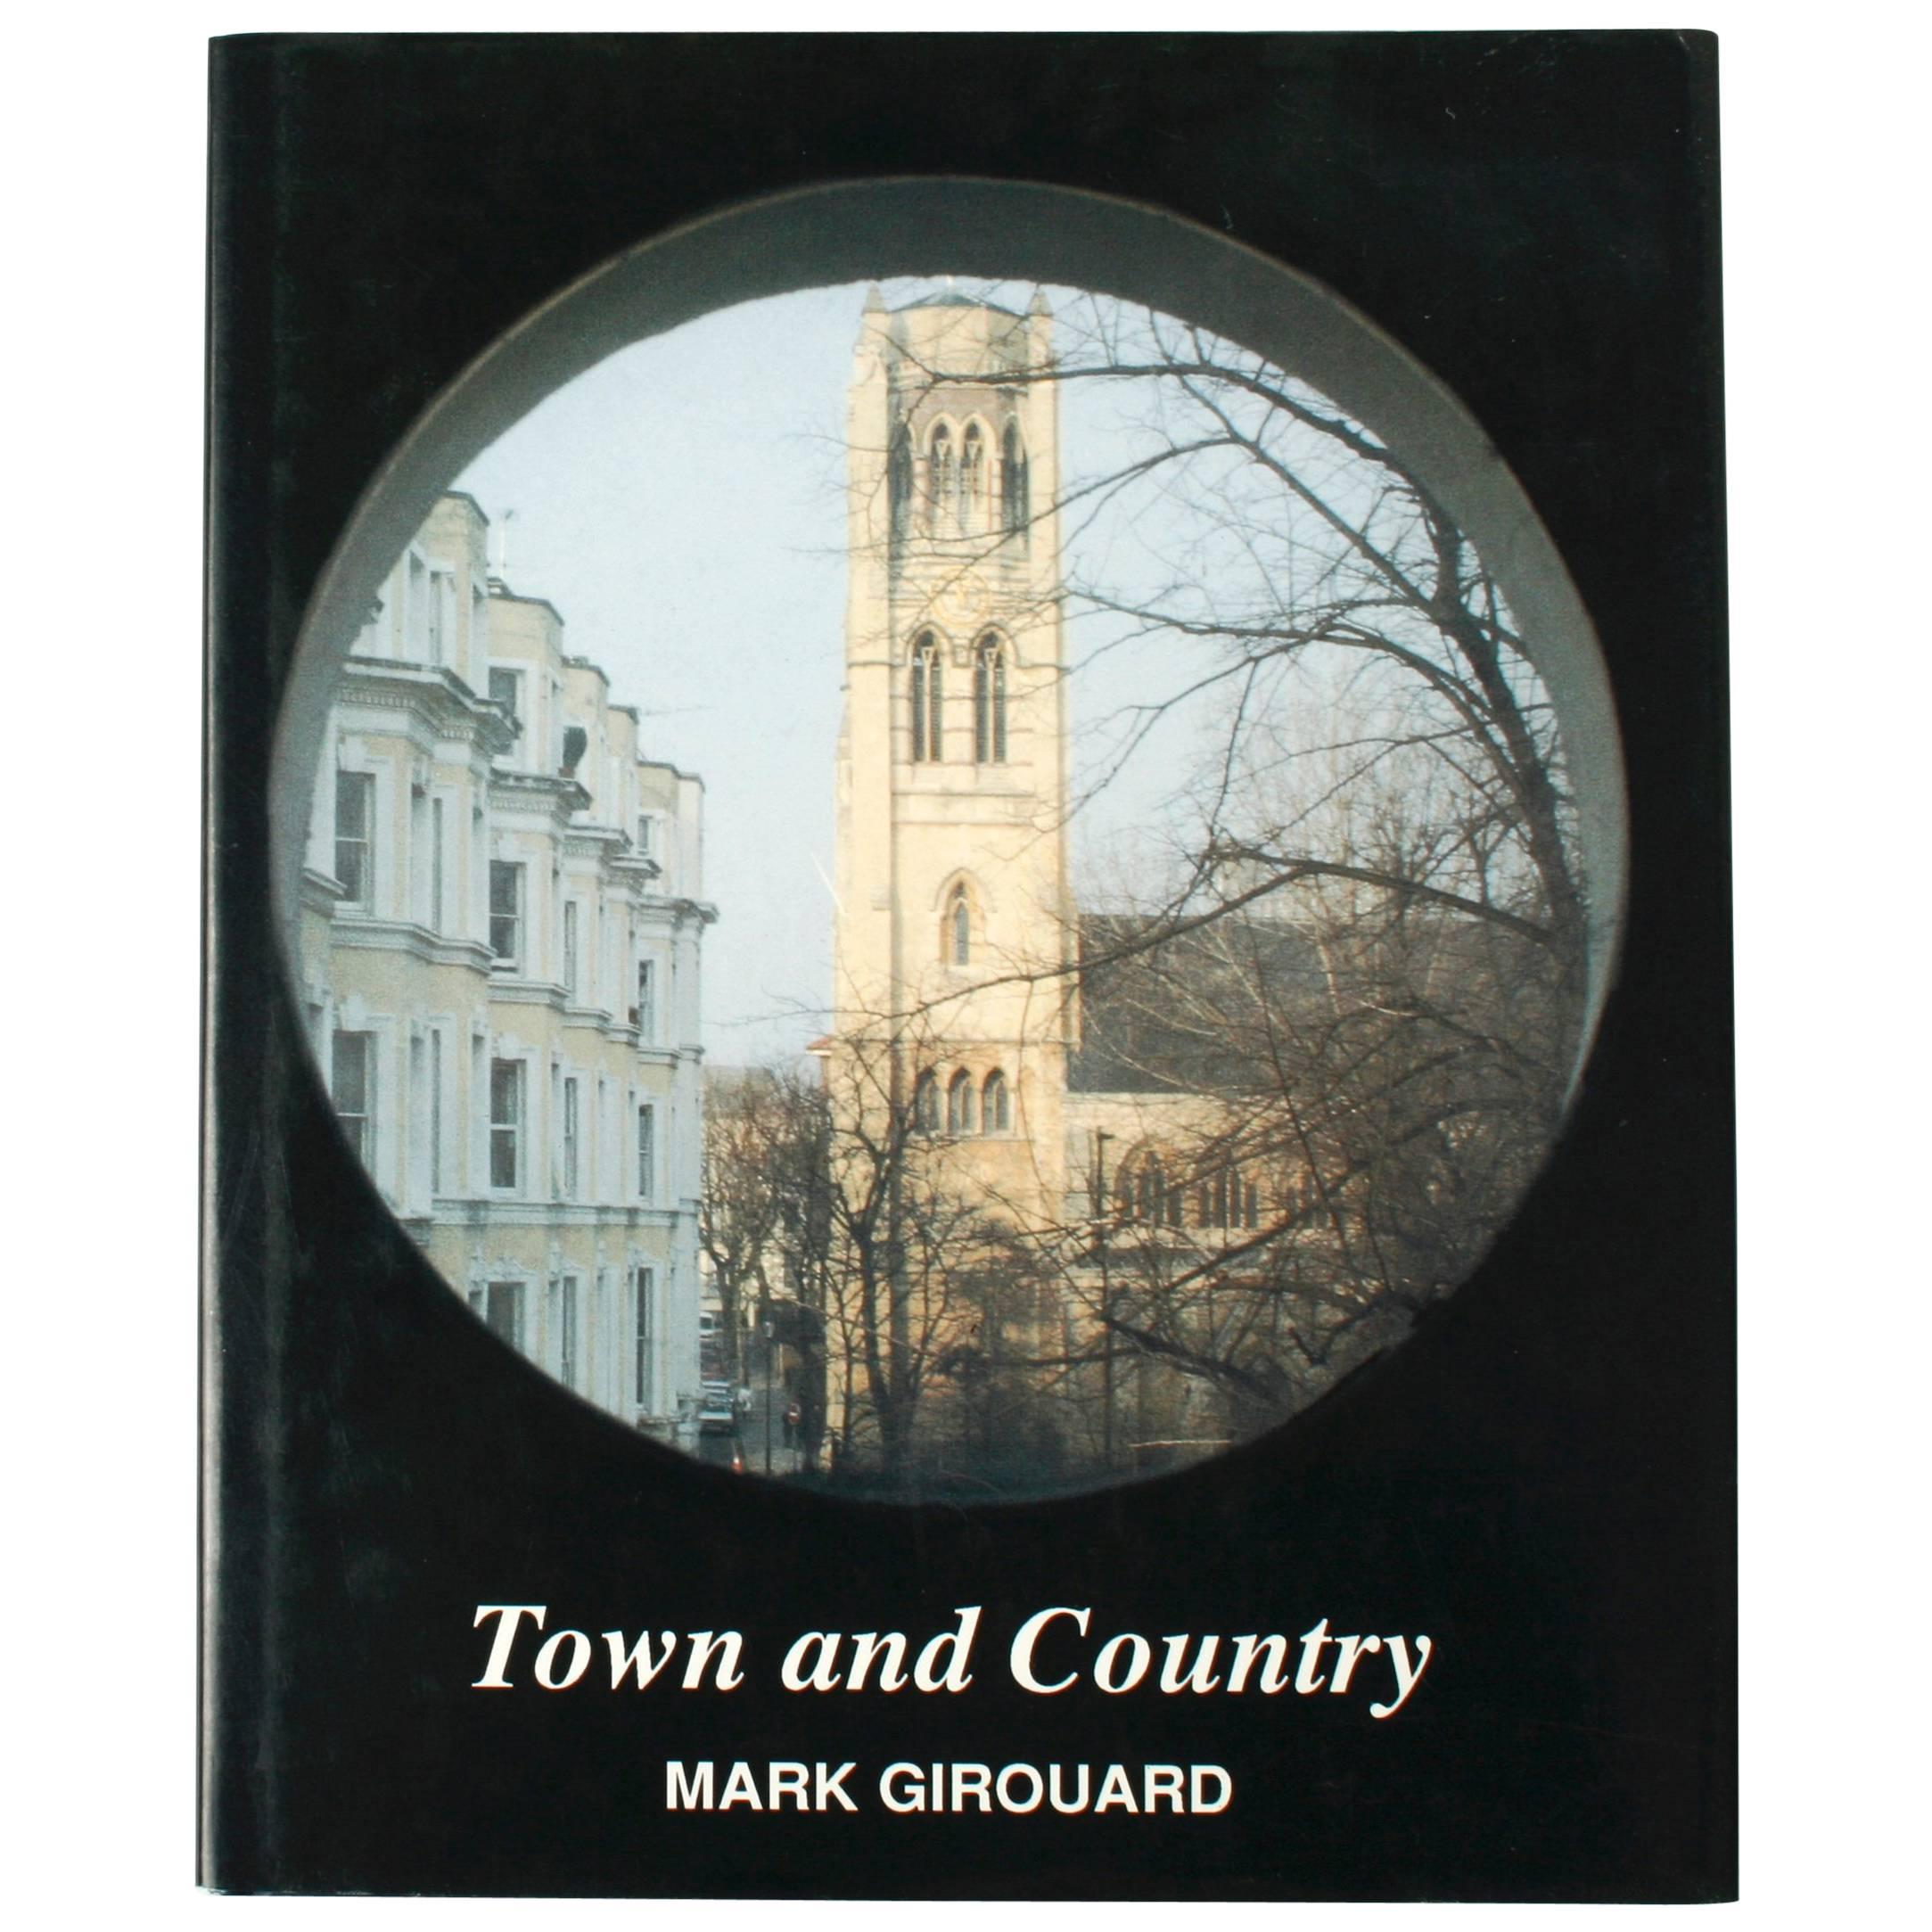 Town and Country by Mark Girouard, First Edition